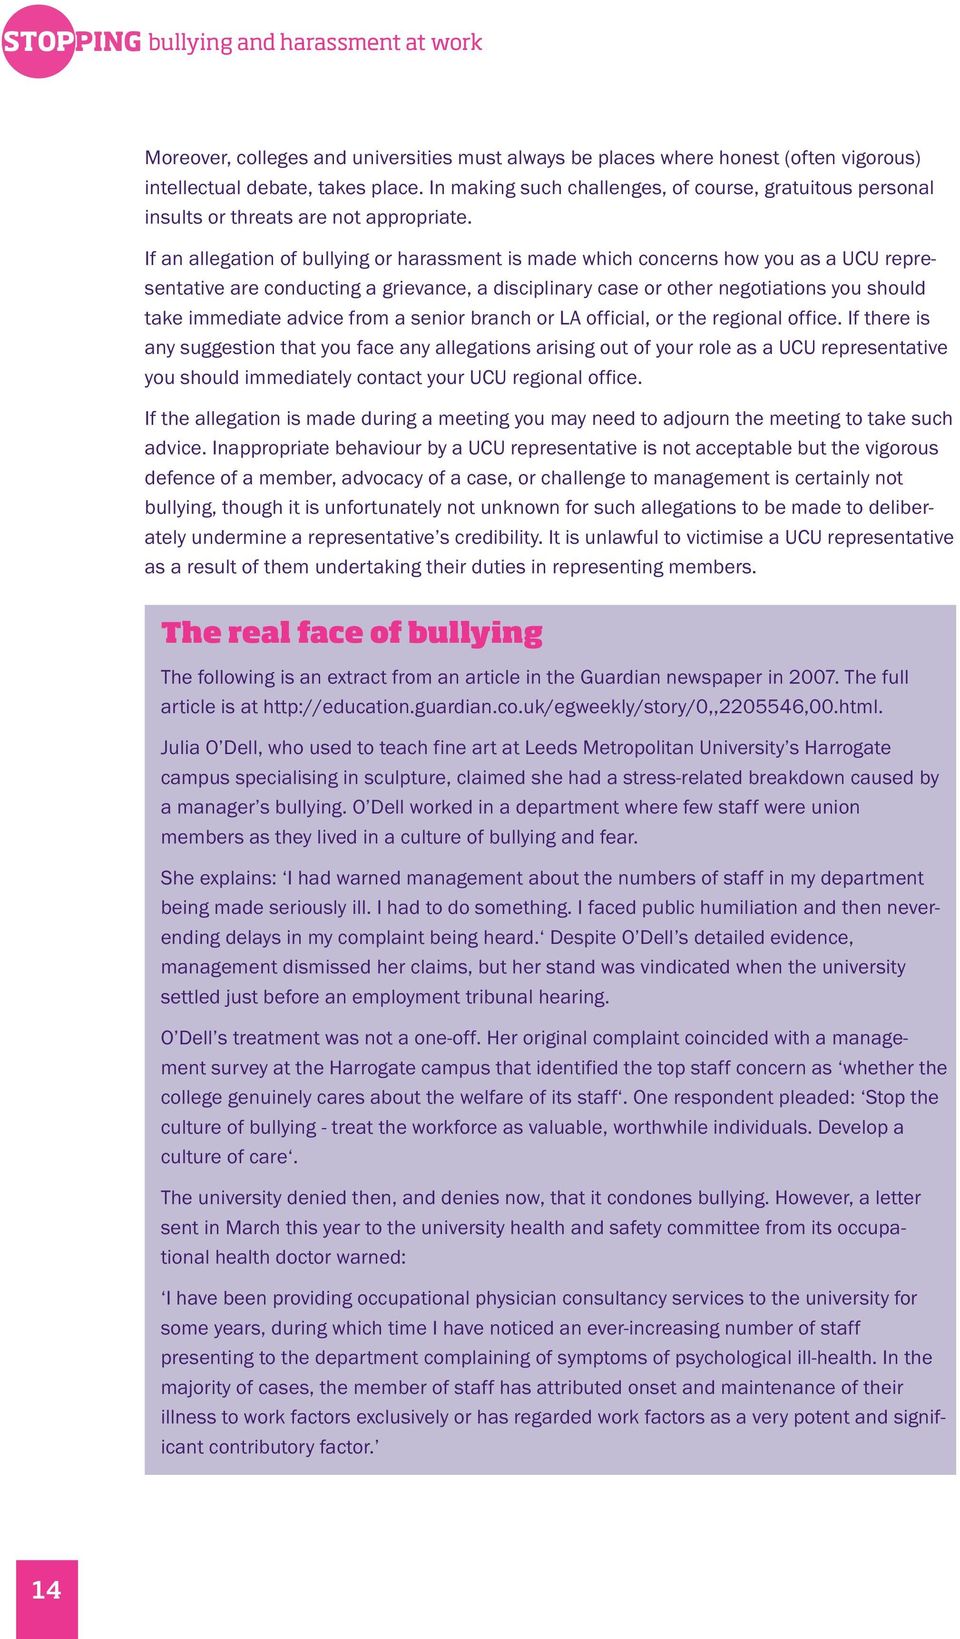 If an allegation of bullying or harassment is made which concerns how you as a UCU representative are conducting a grievance, a disciplinary case or other negotiations you should take immediate